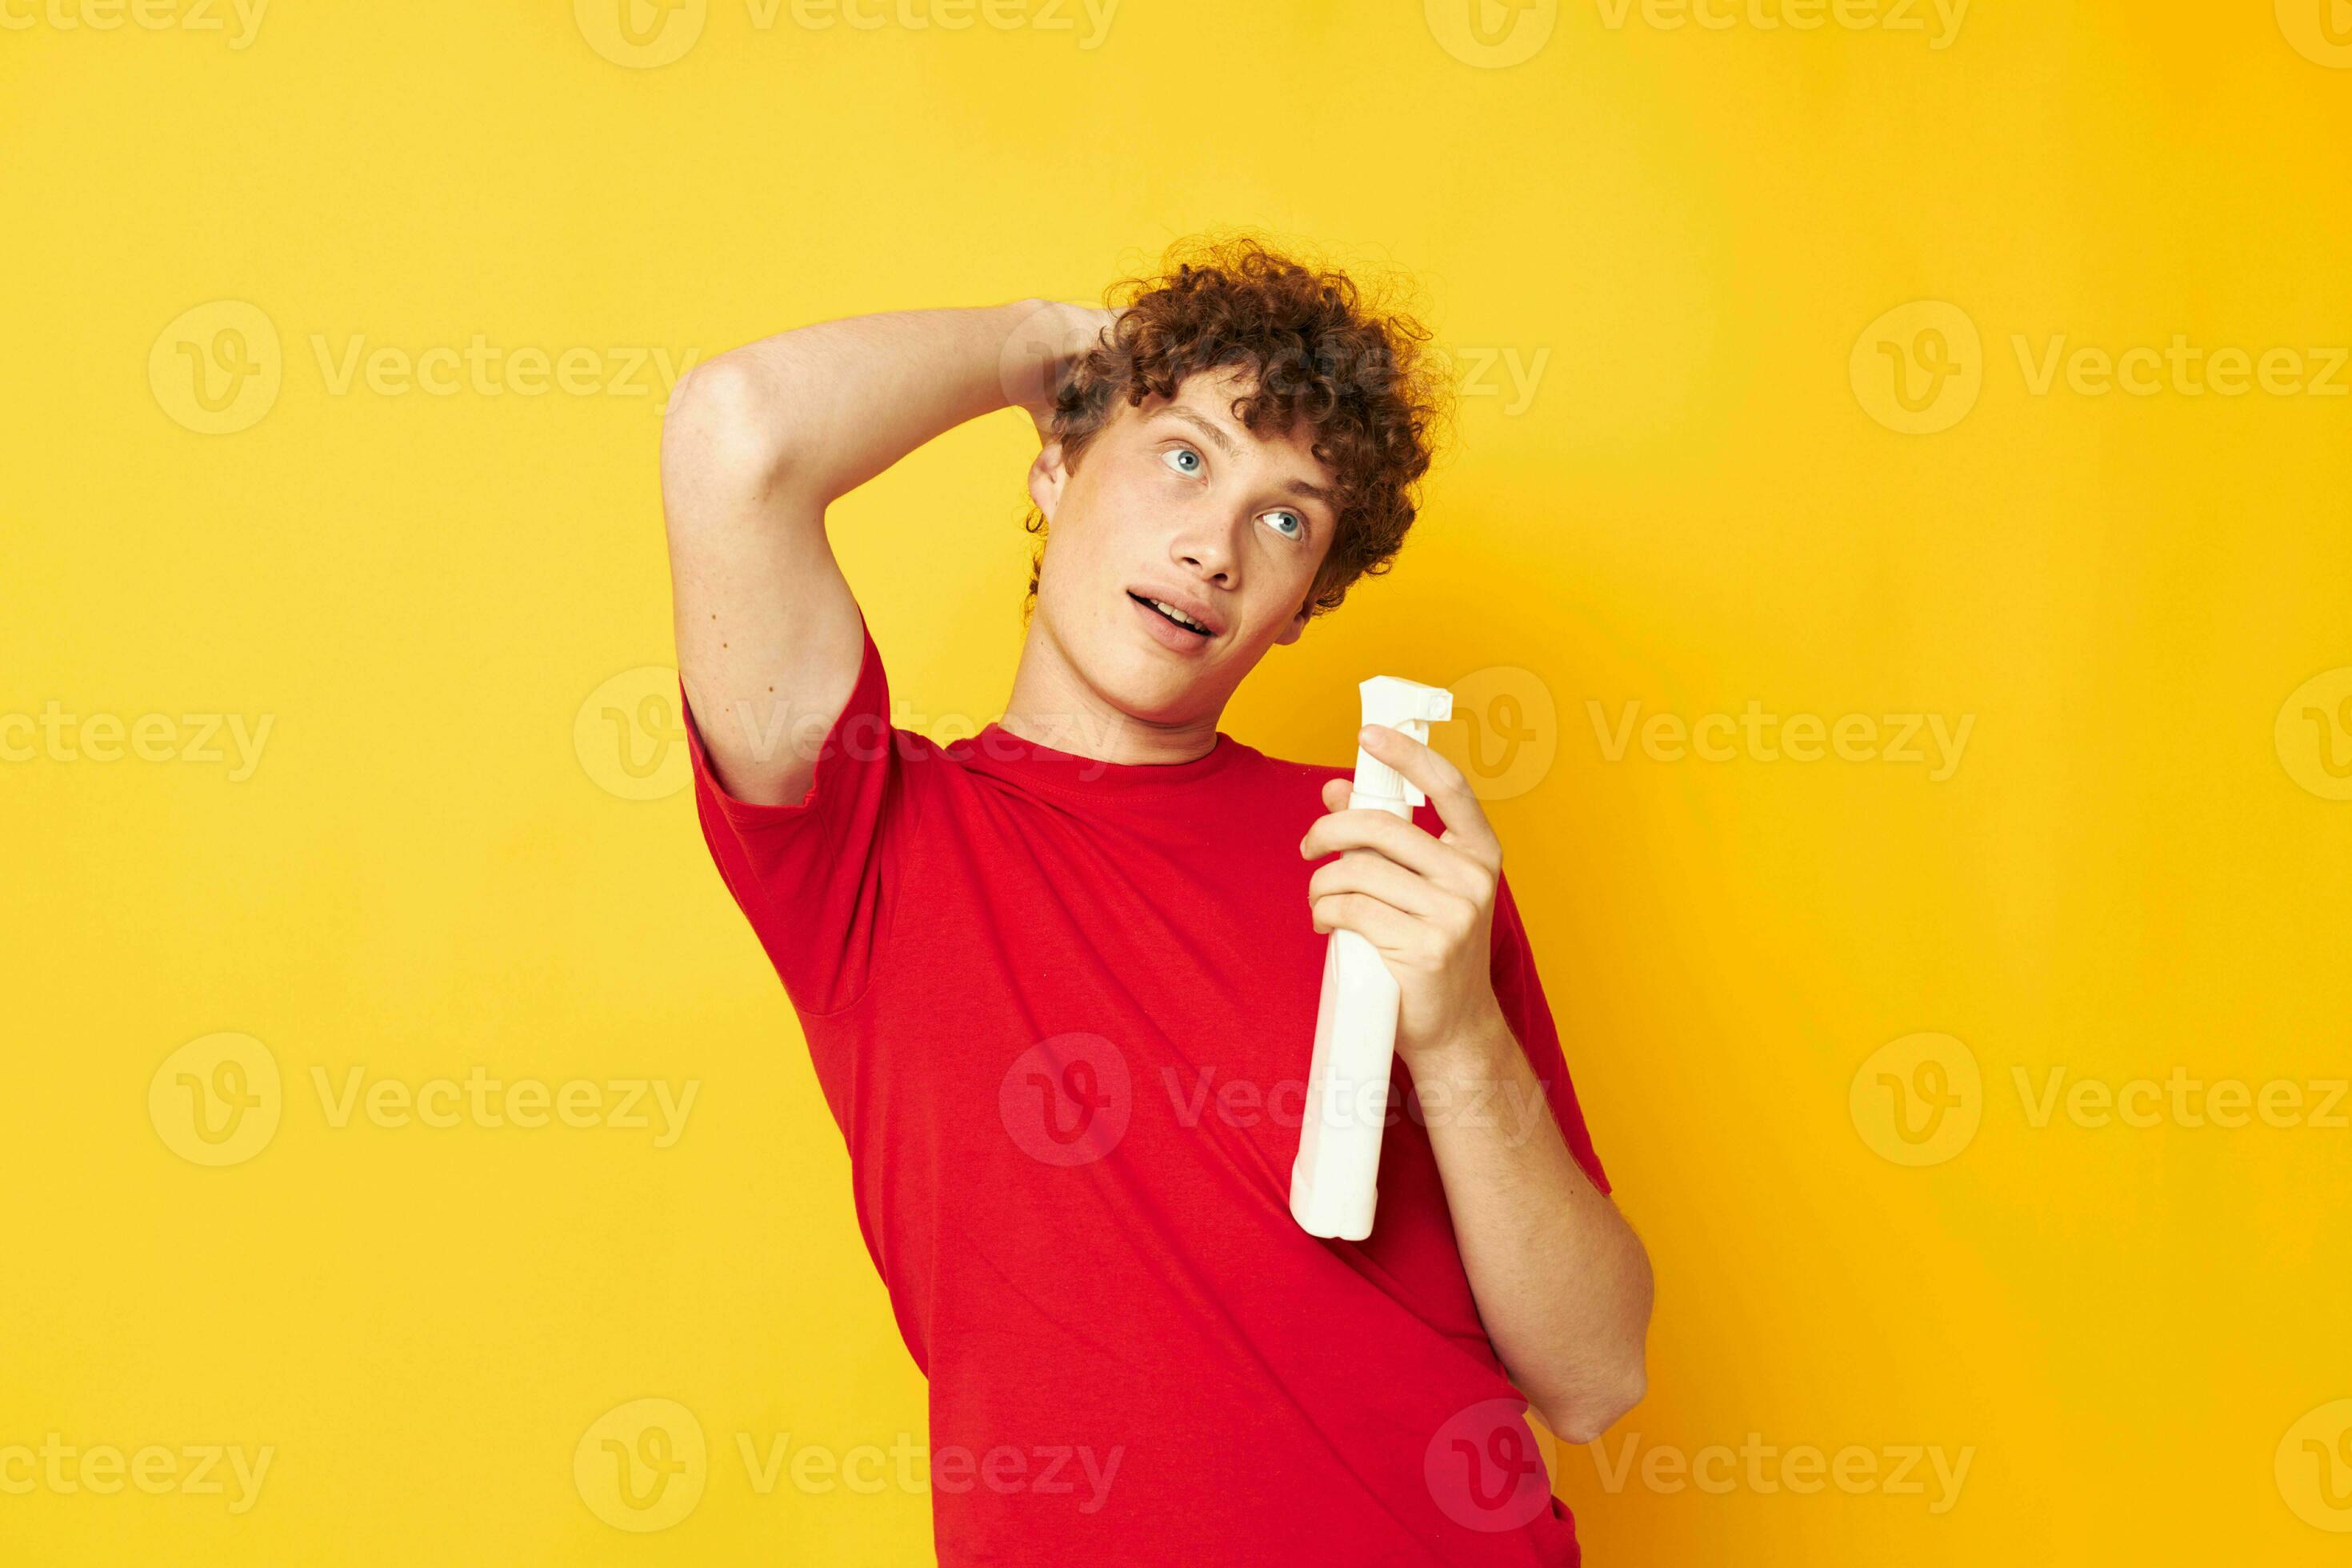 Curly Haired Man with Blonde Locks - wide 2